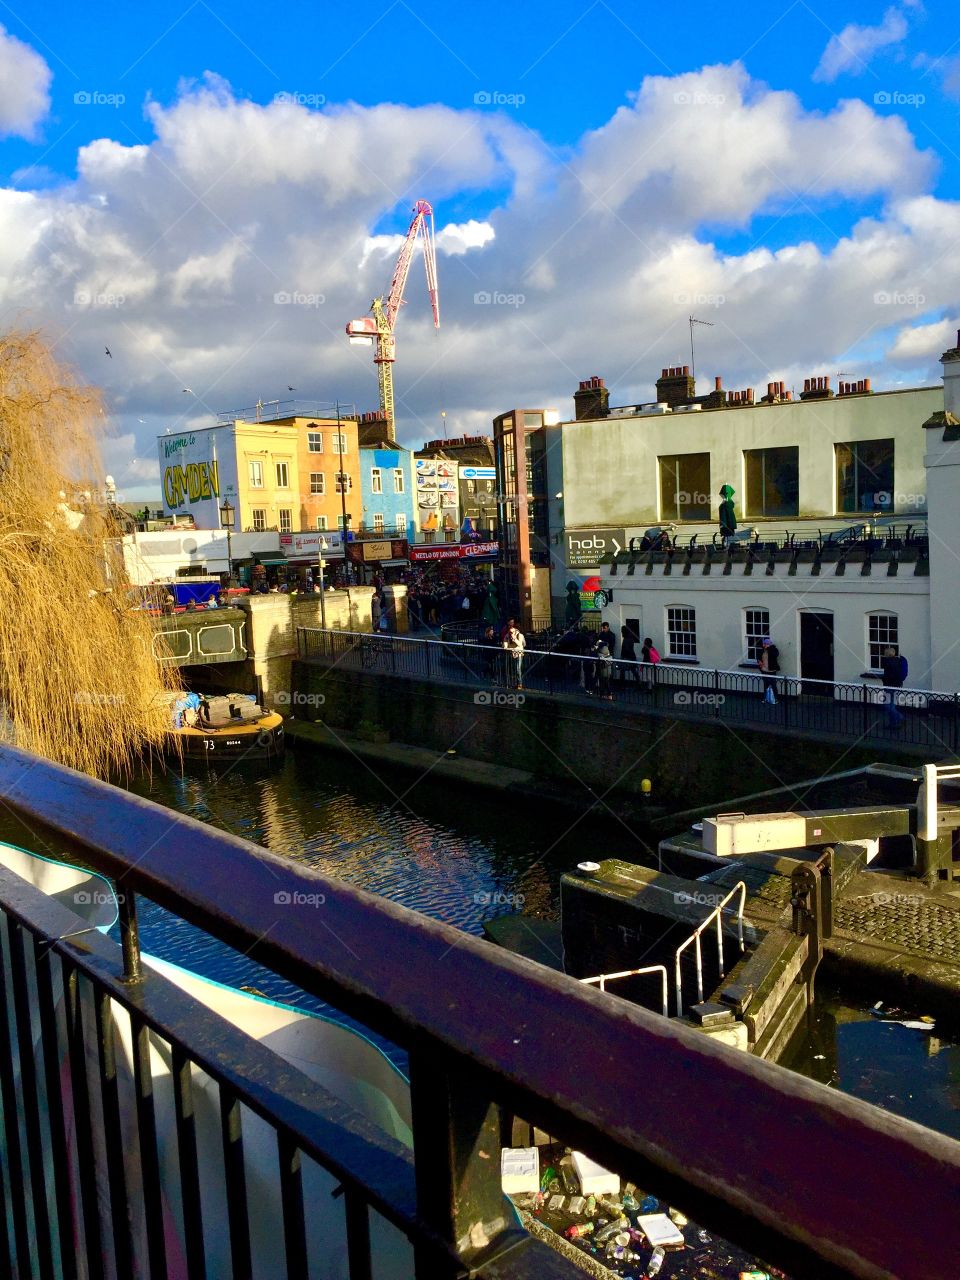 I took this picture in Camden during our trip to London